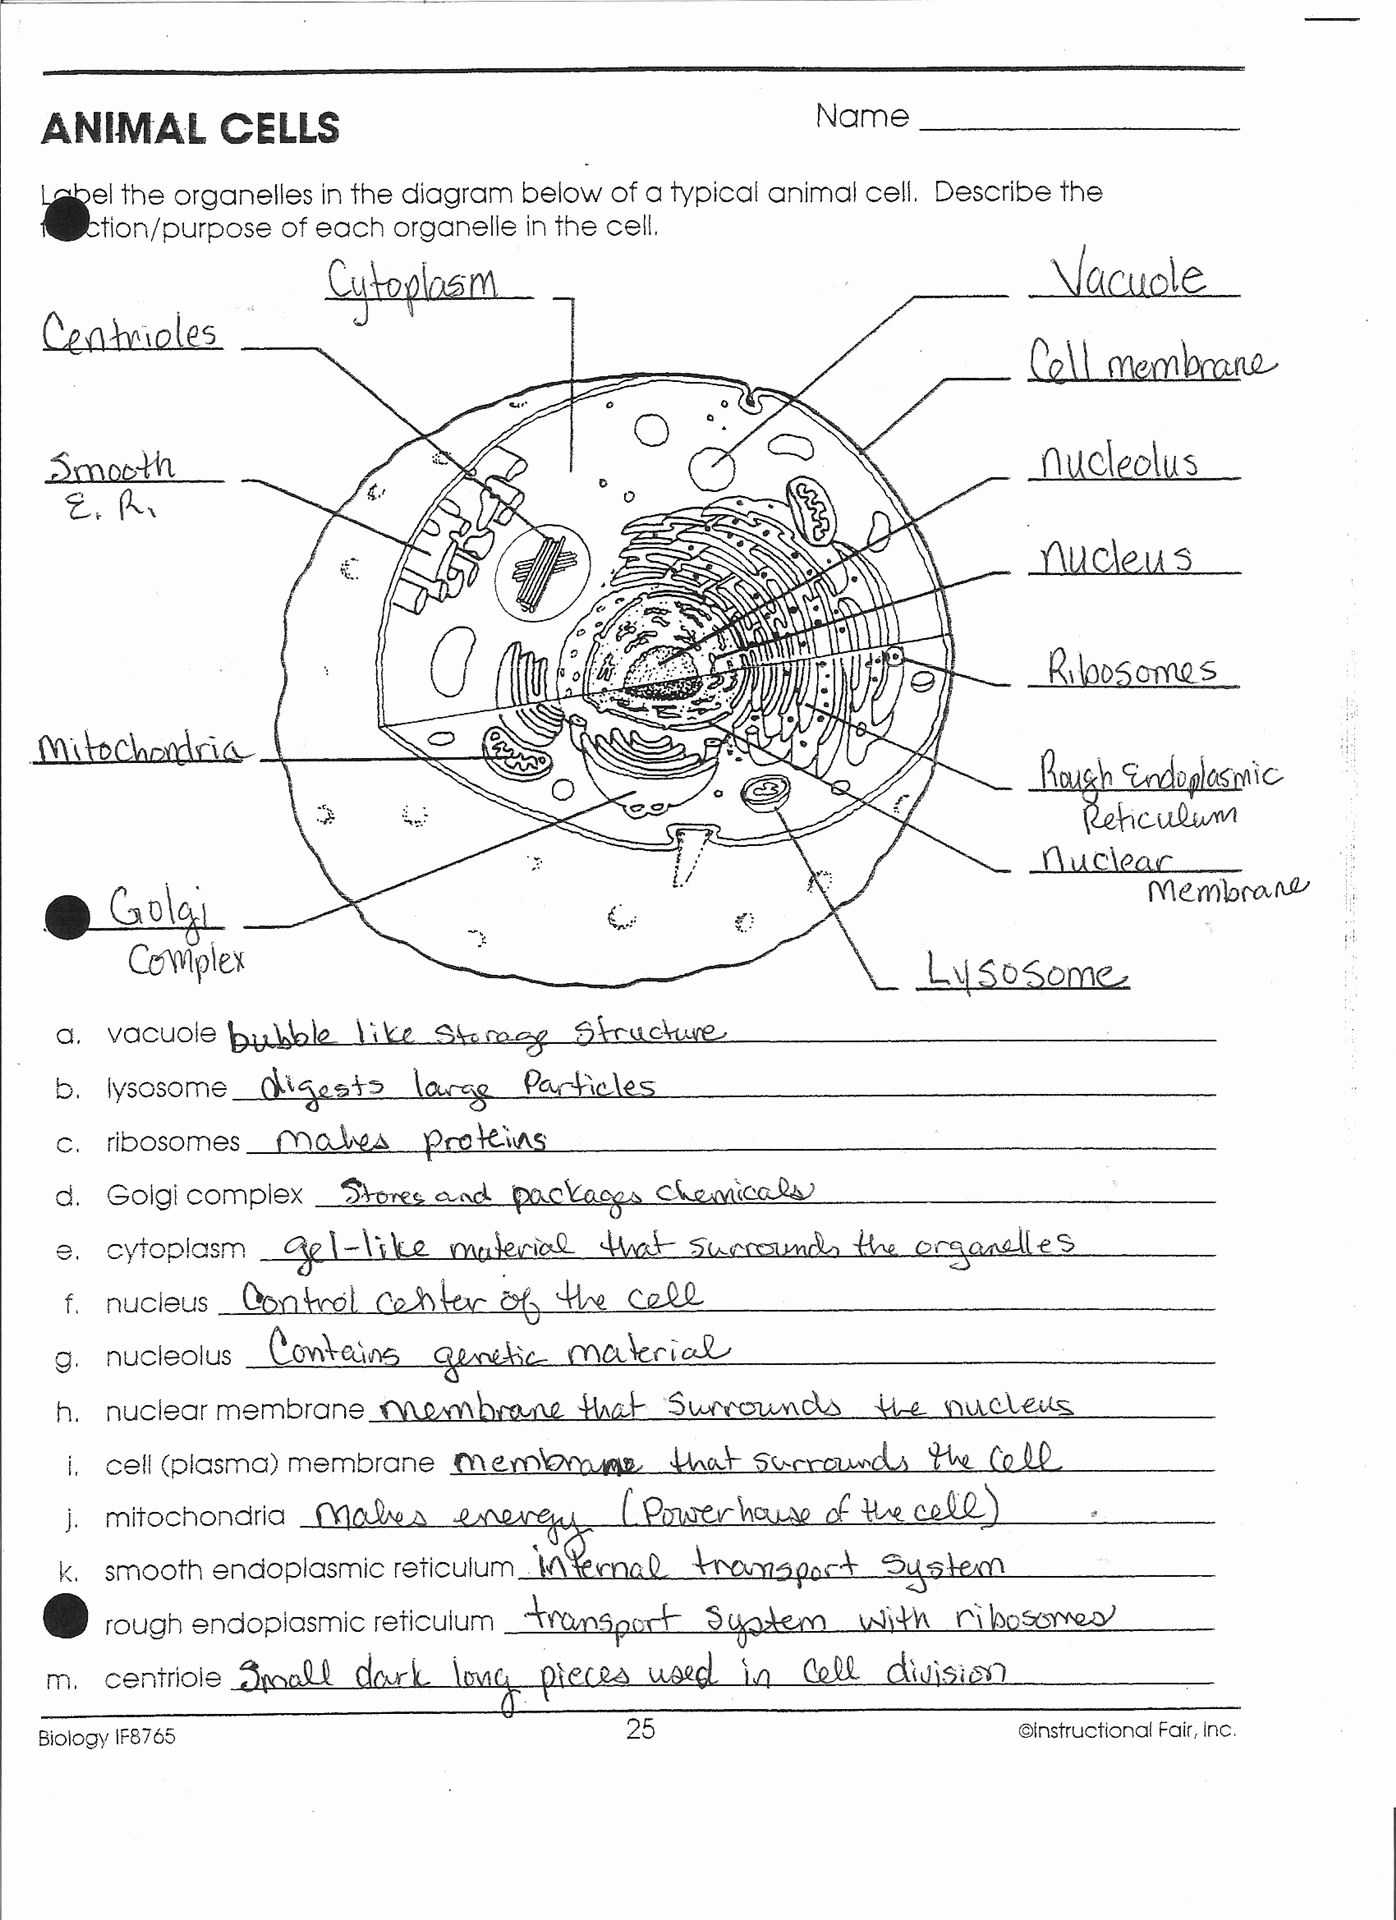 Cell Cycle and Mitosis Worksheet Also the Virtual Cell Worksheet Answers Kidz Activities